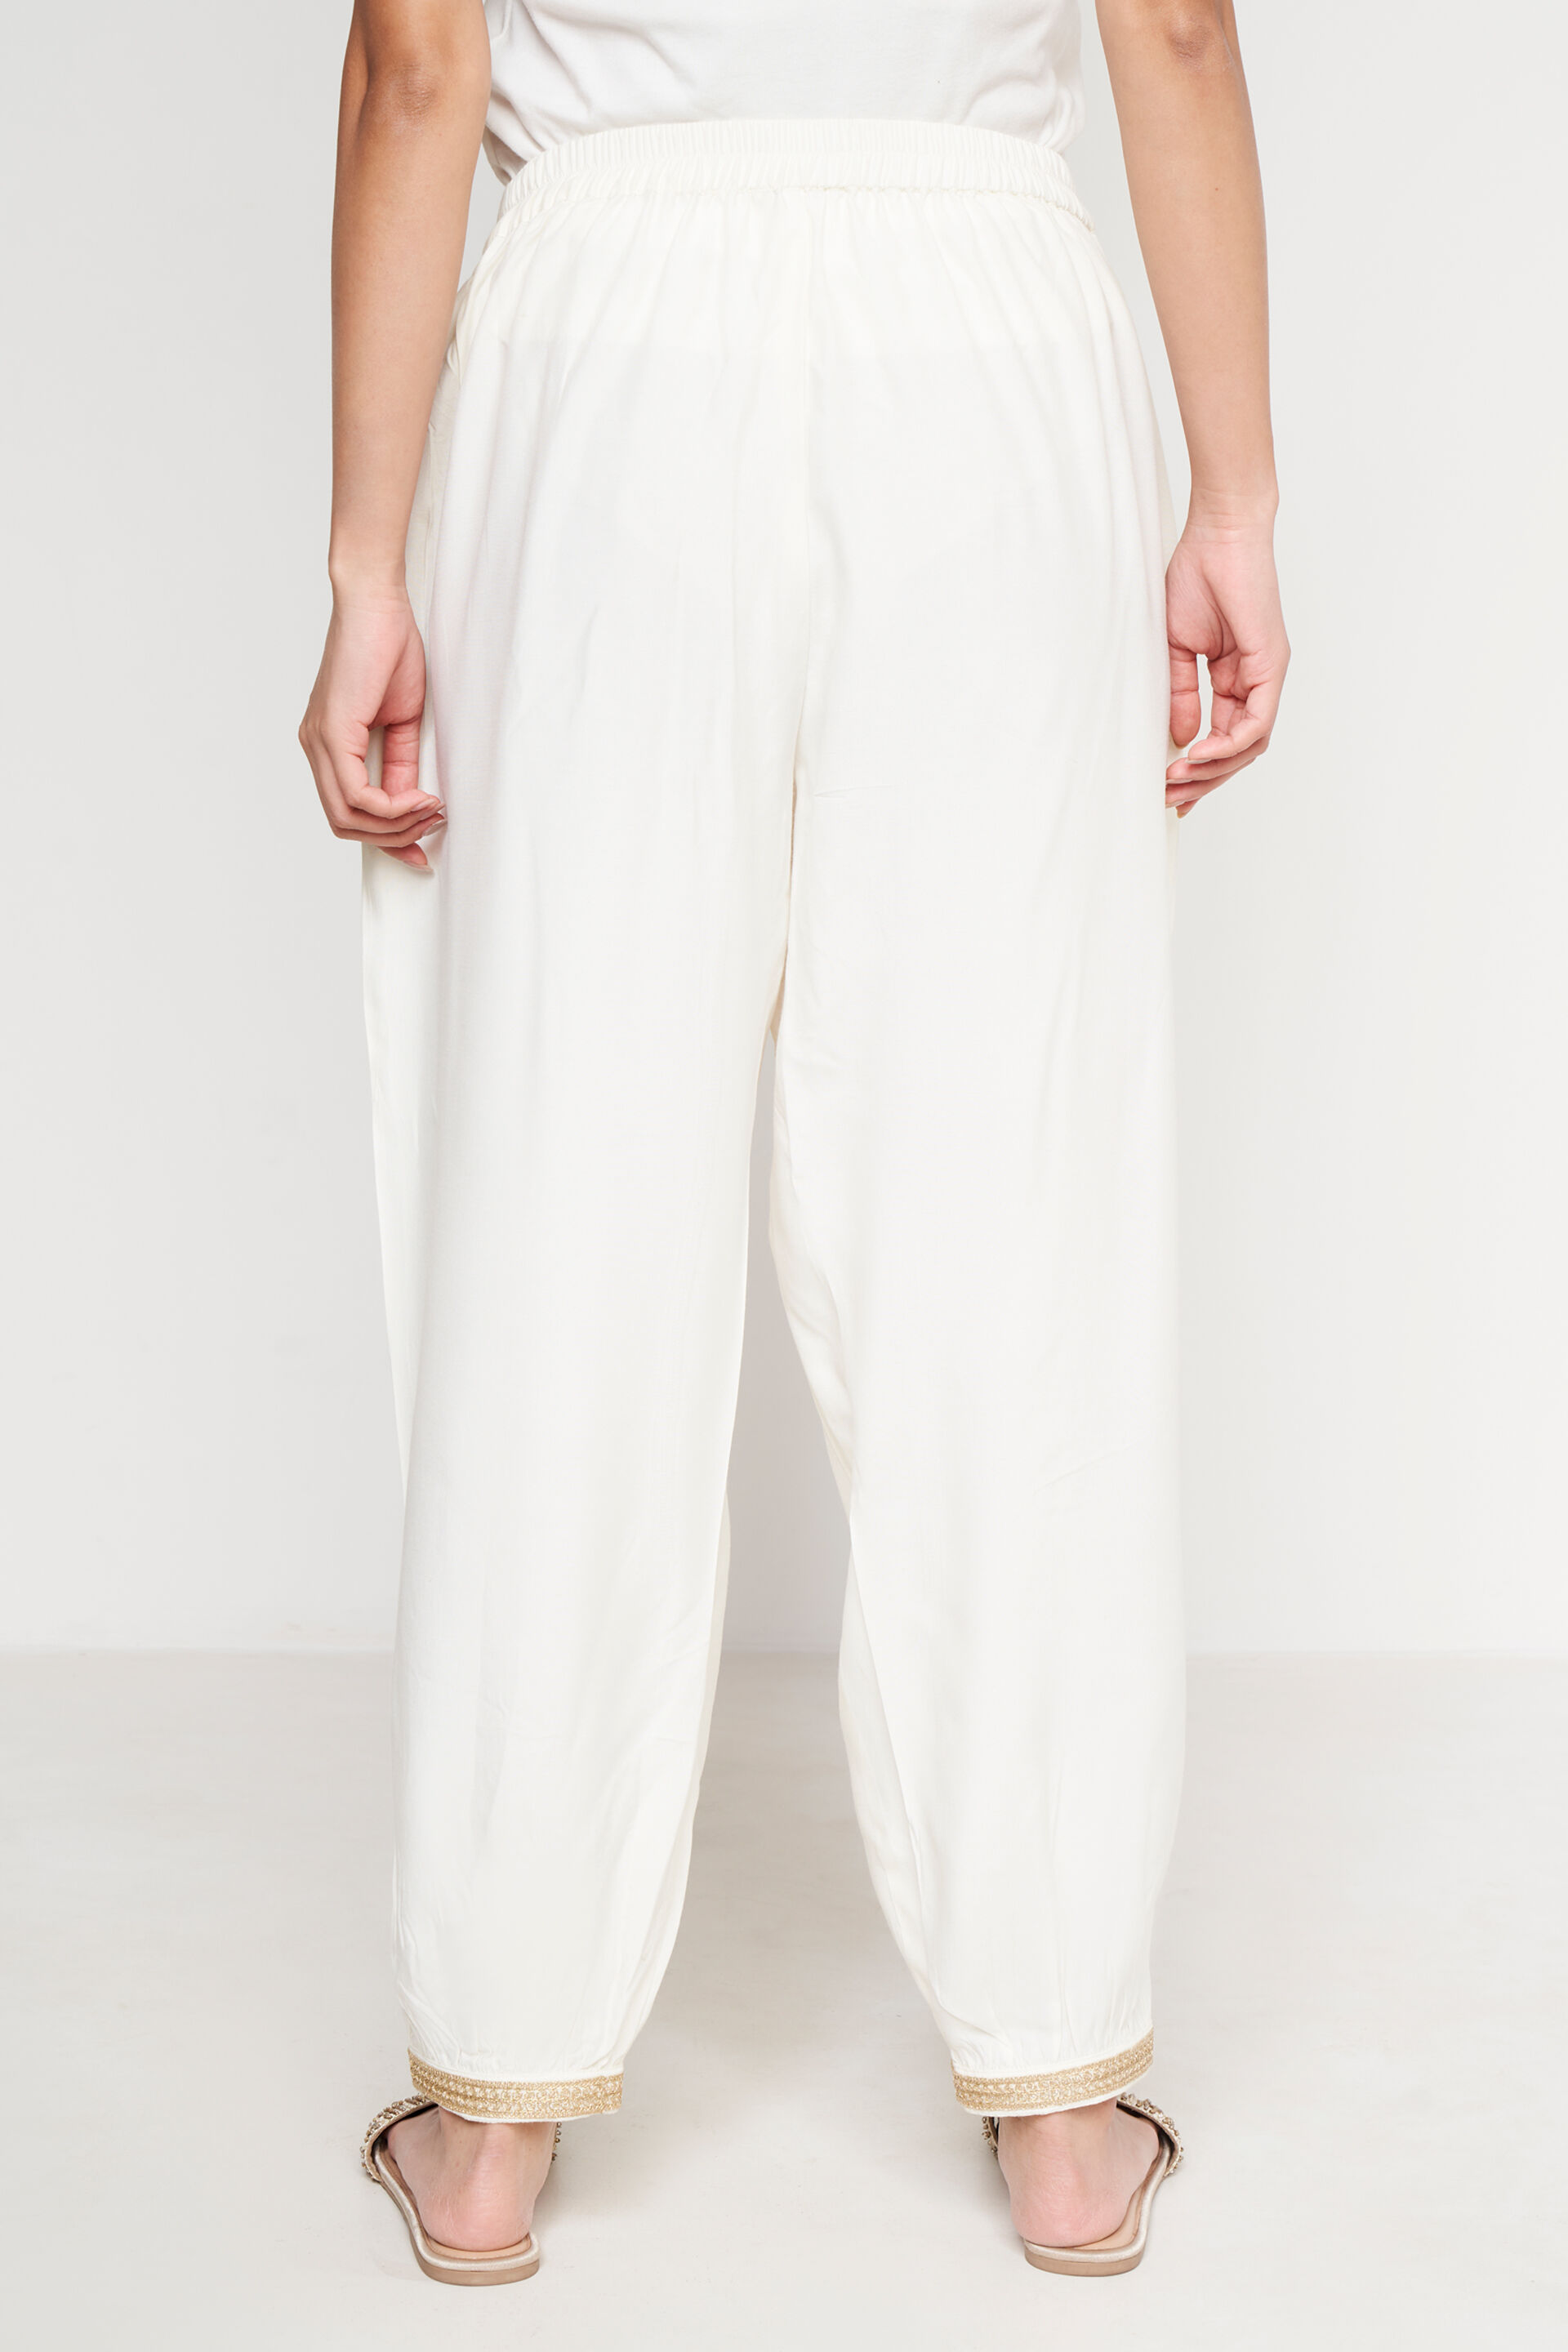 Buy White Cotton Silk Pant For Women by Meghna Panchmatia Online at Aza  Fashions.